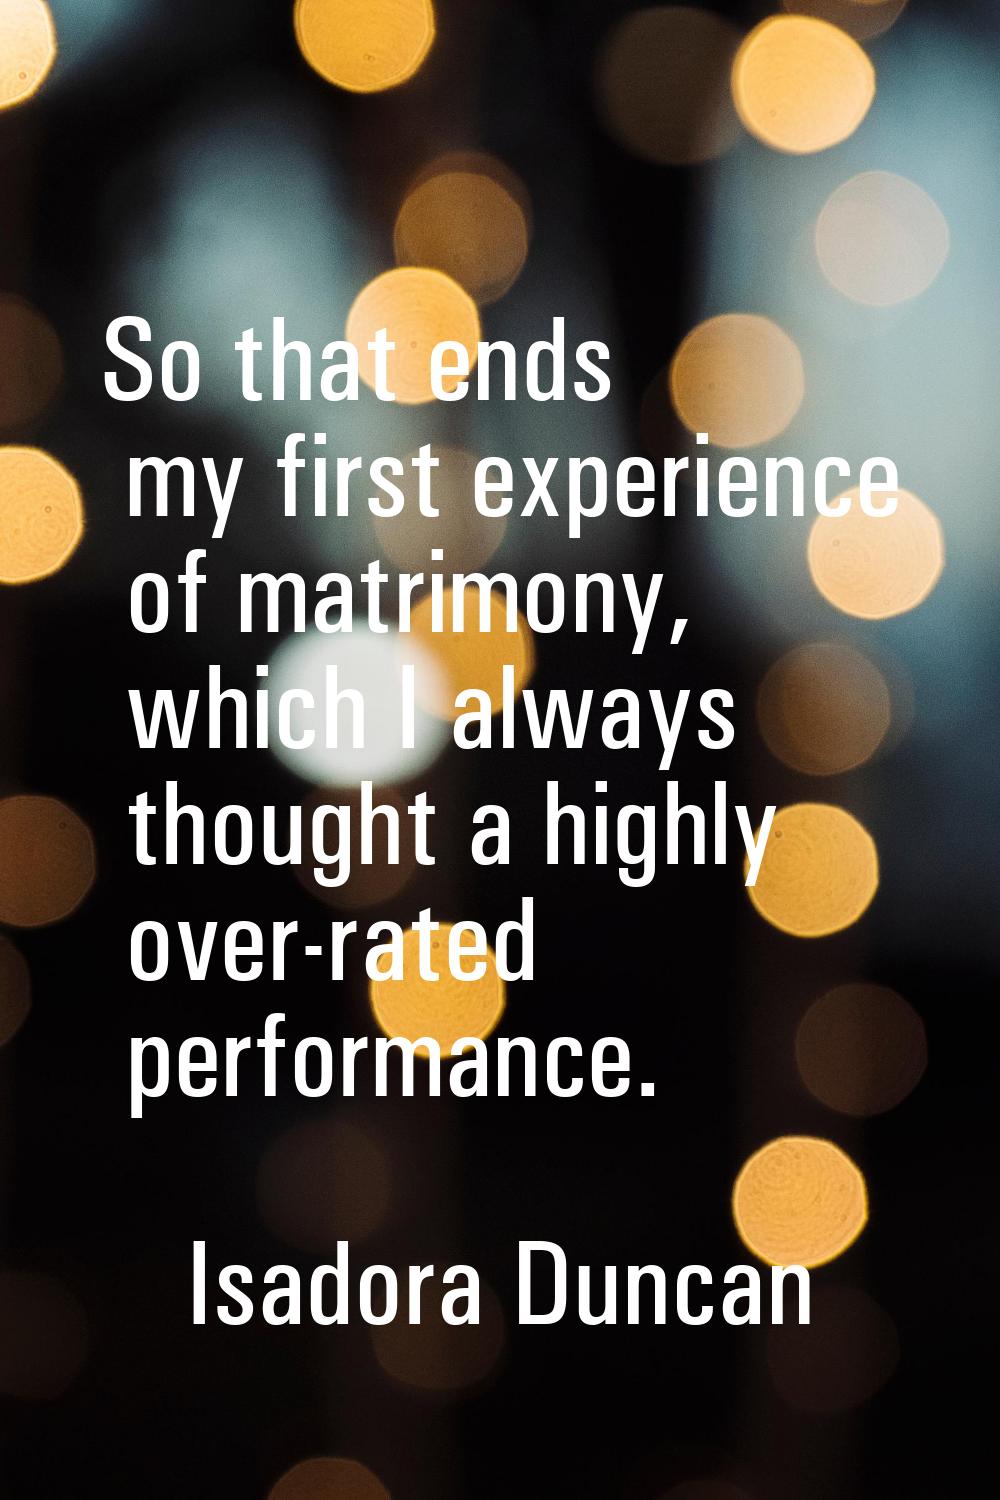 So that ends my first experience of matrimony, which I always thought a highly over-rated performan